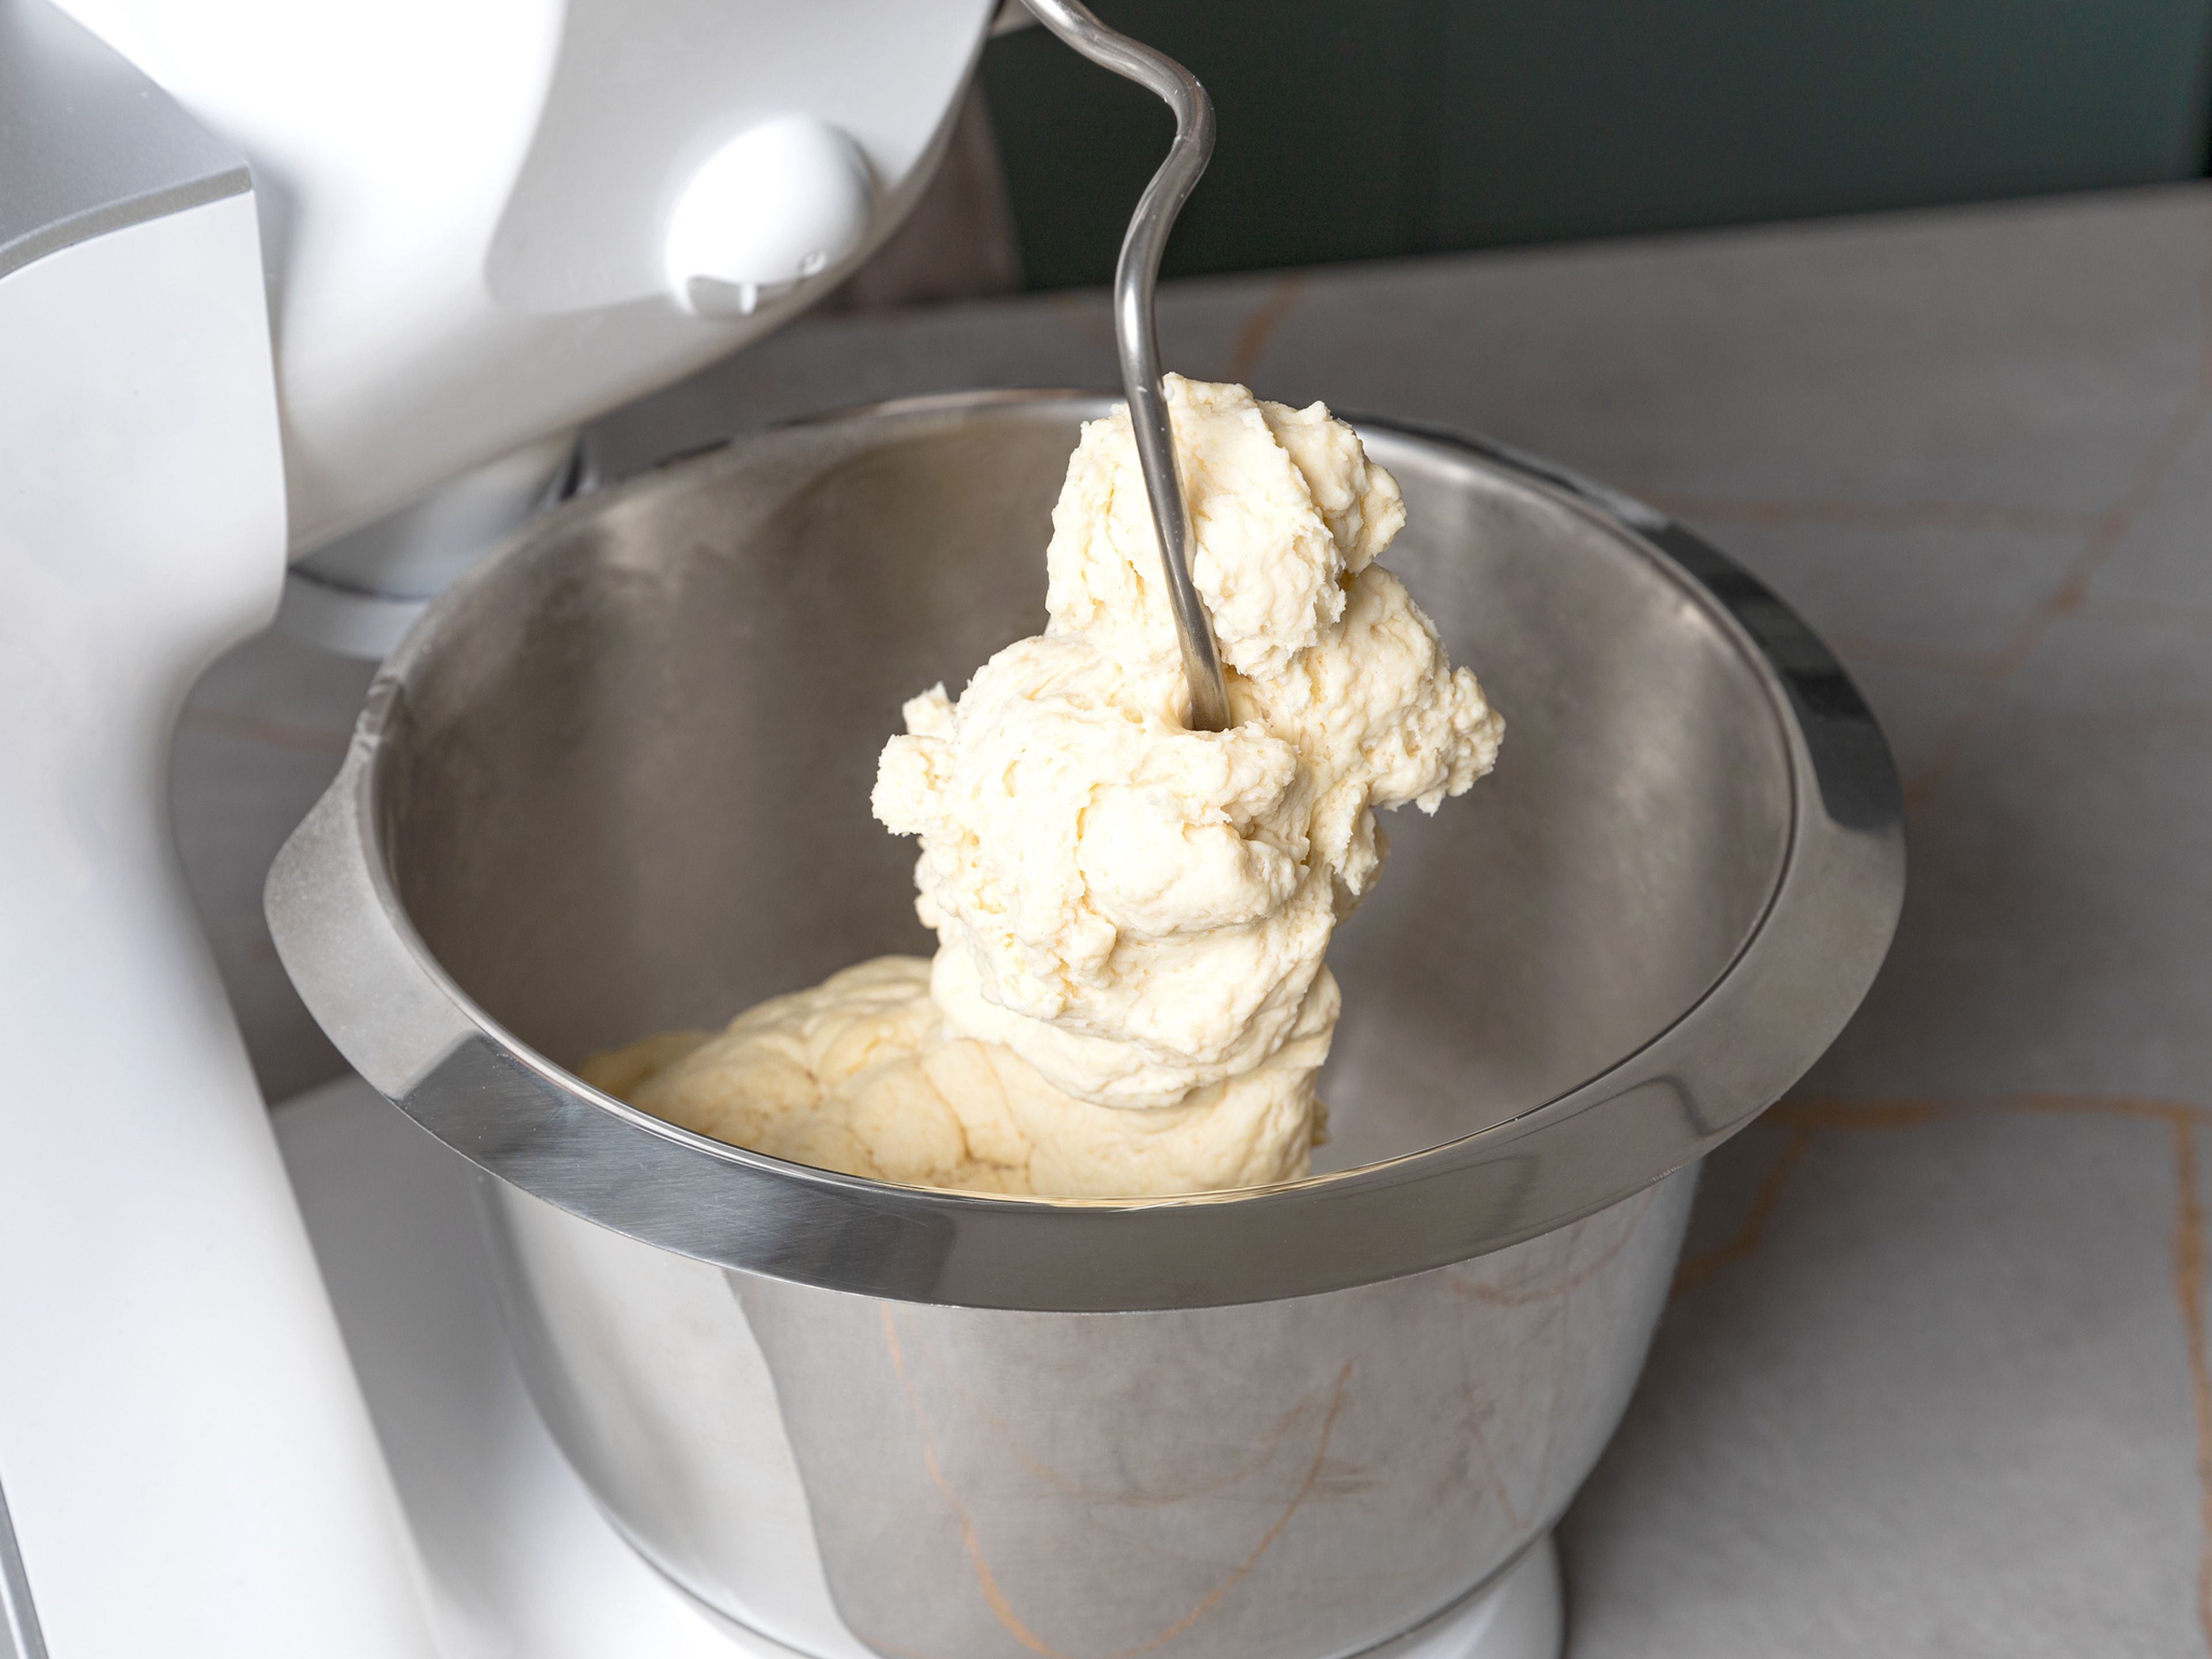 Preheat the oven to 175°C/347°F. In a bowl, mix flour, baking powder and a pinch of salt. Add quark, most of the milk, half of the powdered sugar and oil, and mix everything with a stand mixer with a dough hook until a smooth dough forms. If the dough is too sticky, add some more flour and mix. Cover the dough and set aside.